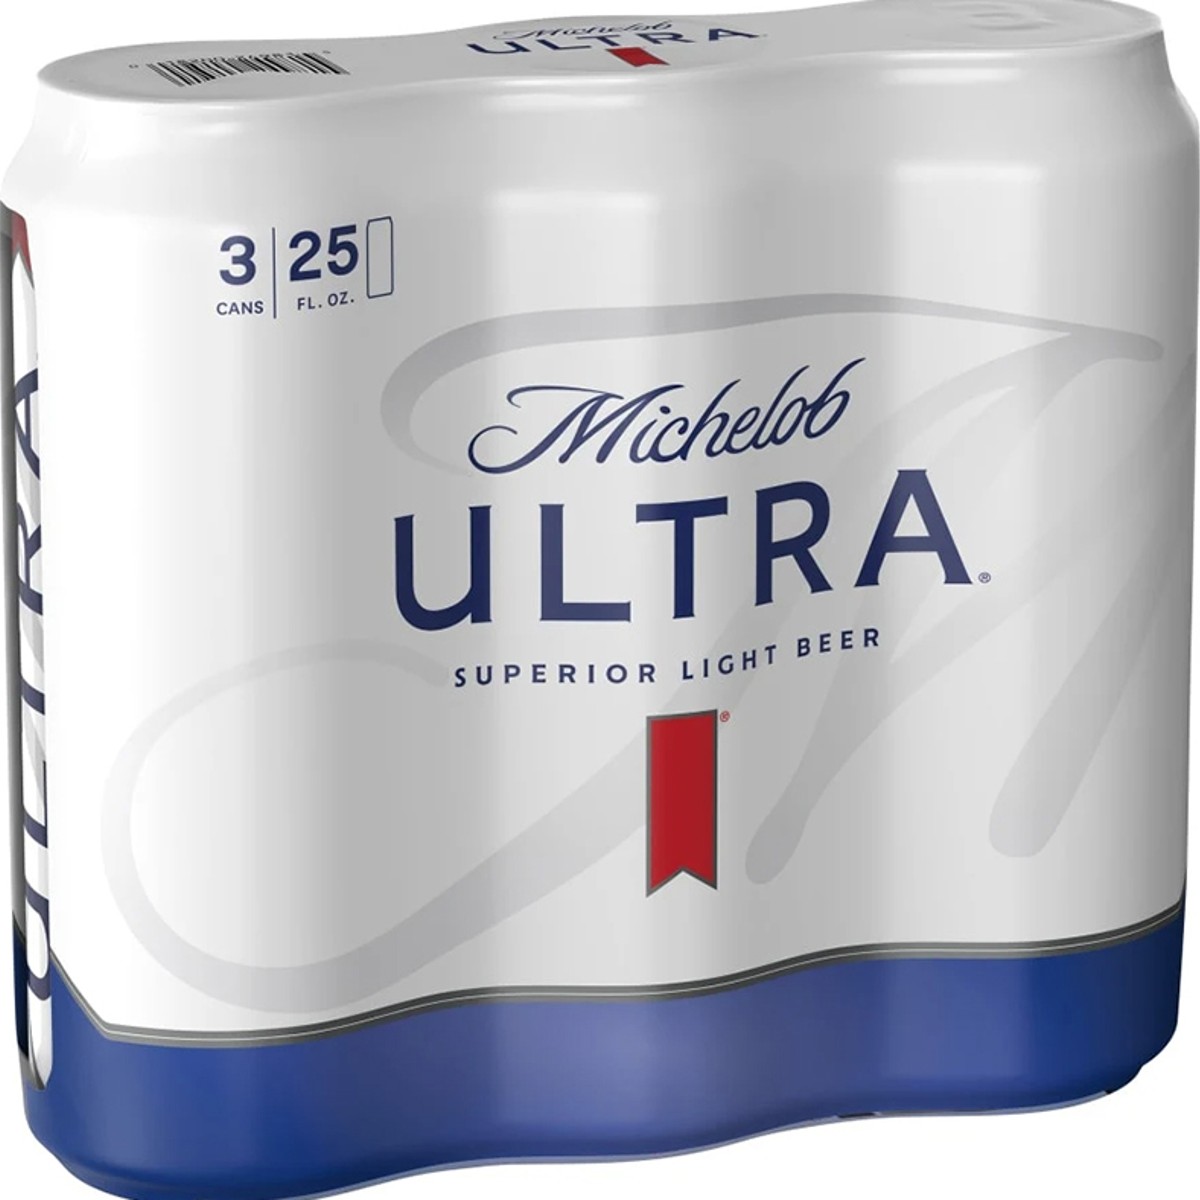 Miami Heat get their own Michelob ULTRA beer can